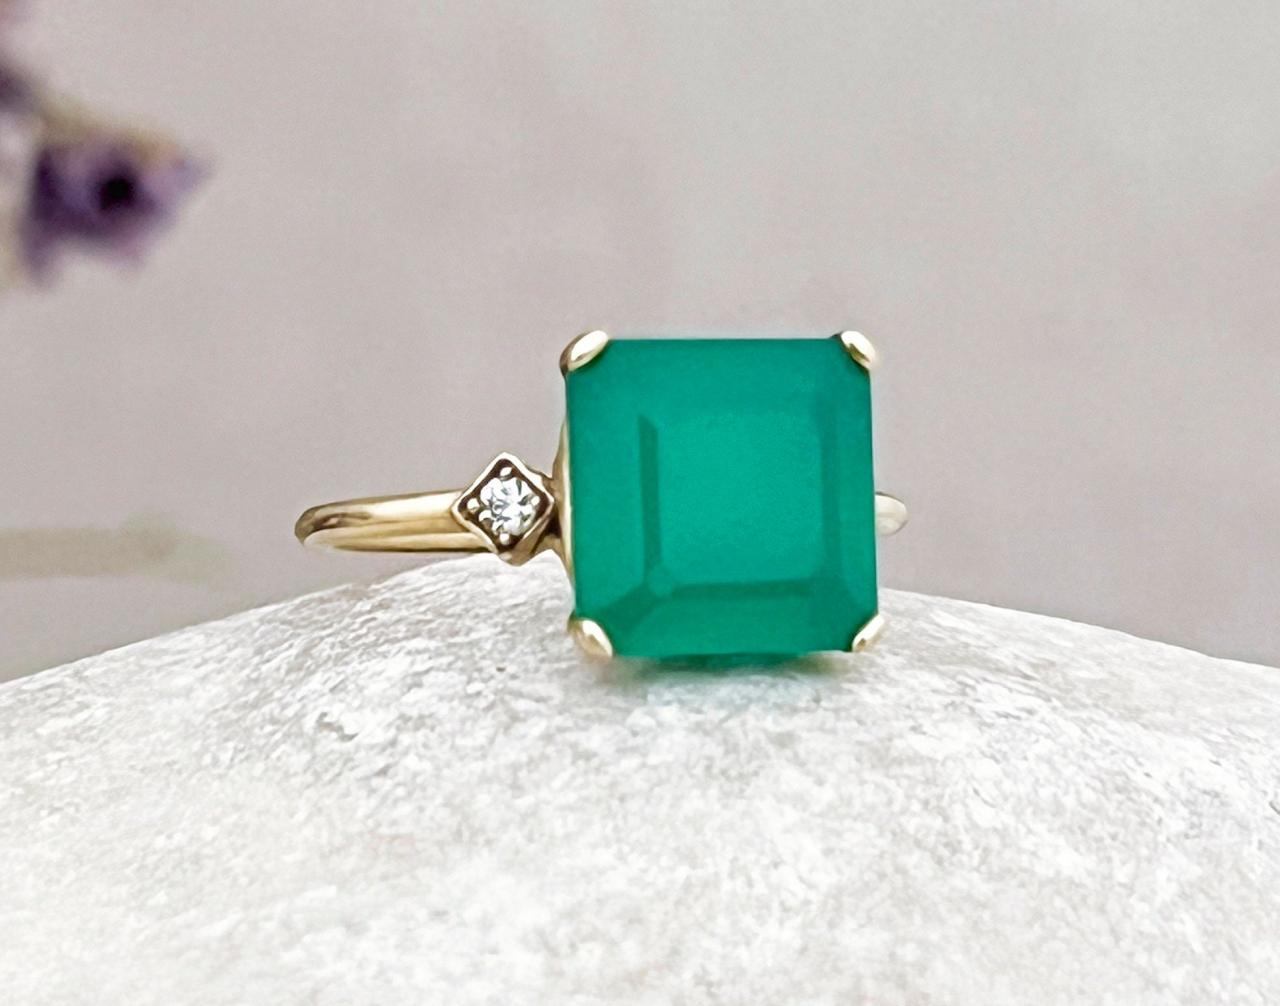  Solid gold engagement ring with asscher green chalcedony, Green quartz gemstone and diamond bridal ring, 18k gold art deco solitaire ring